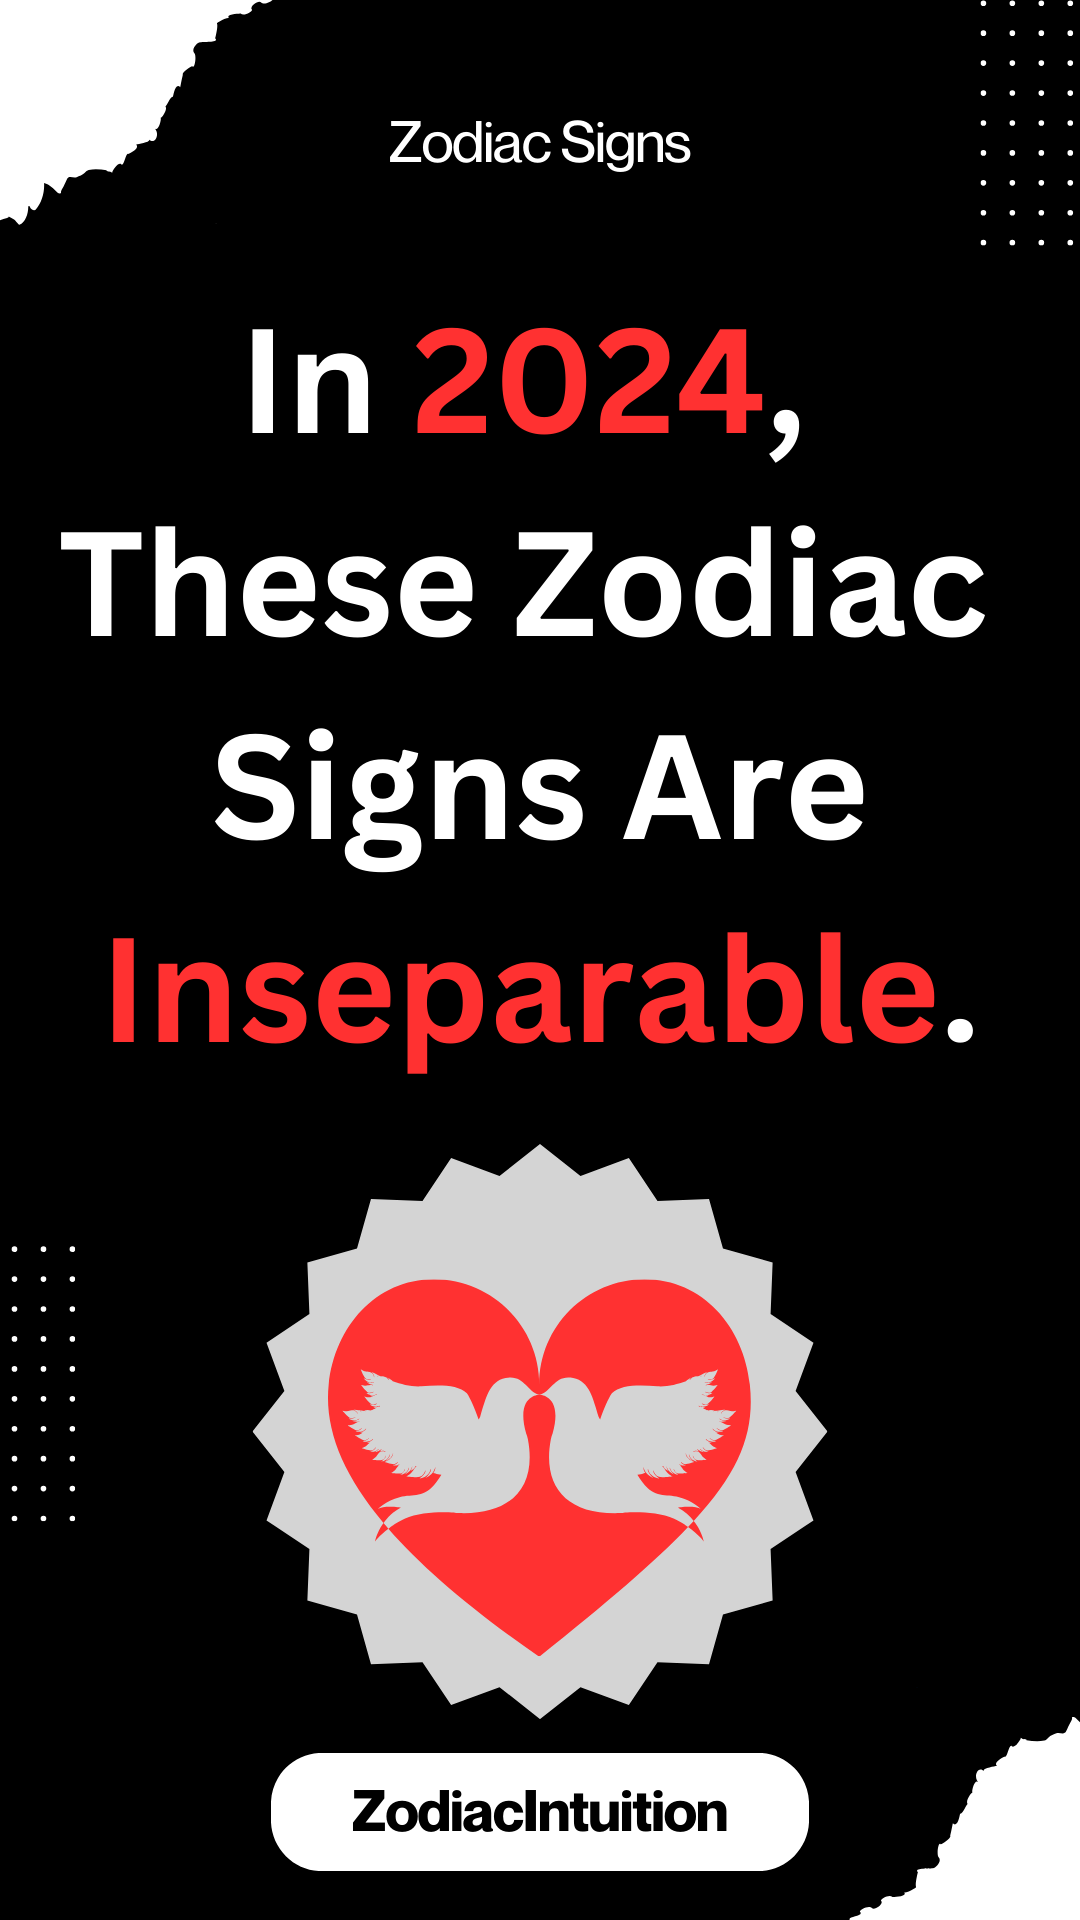 In 2024, These Zodiac Signs Are Inseparable.